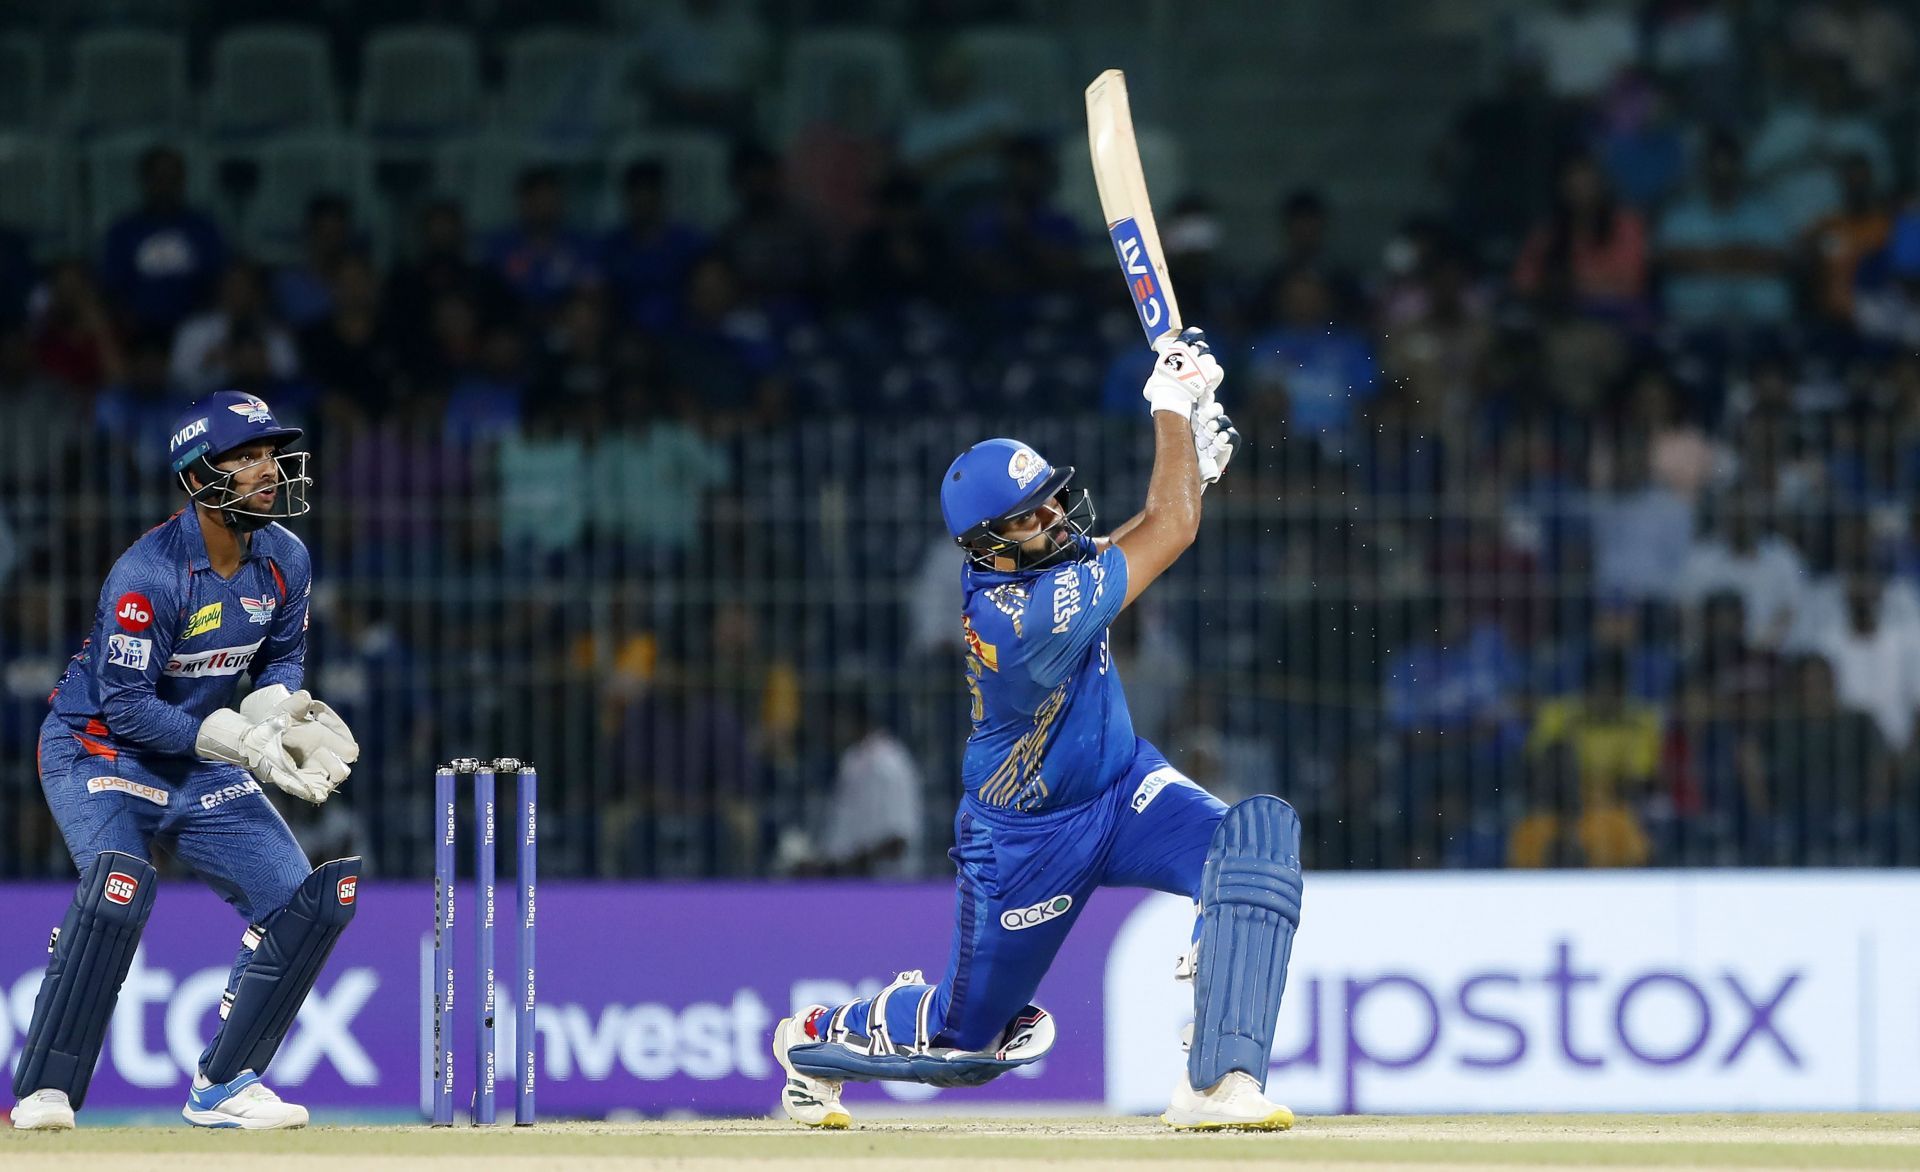 Rohit will look to rediscover his batting form in the IPL.